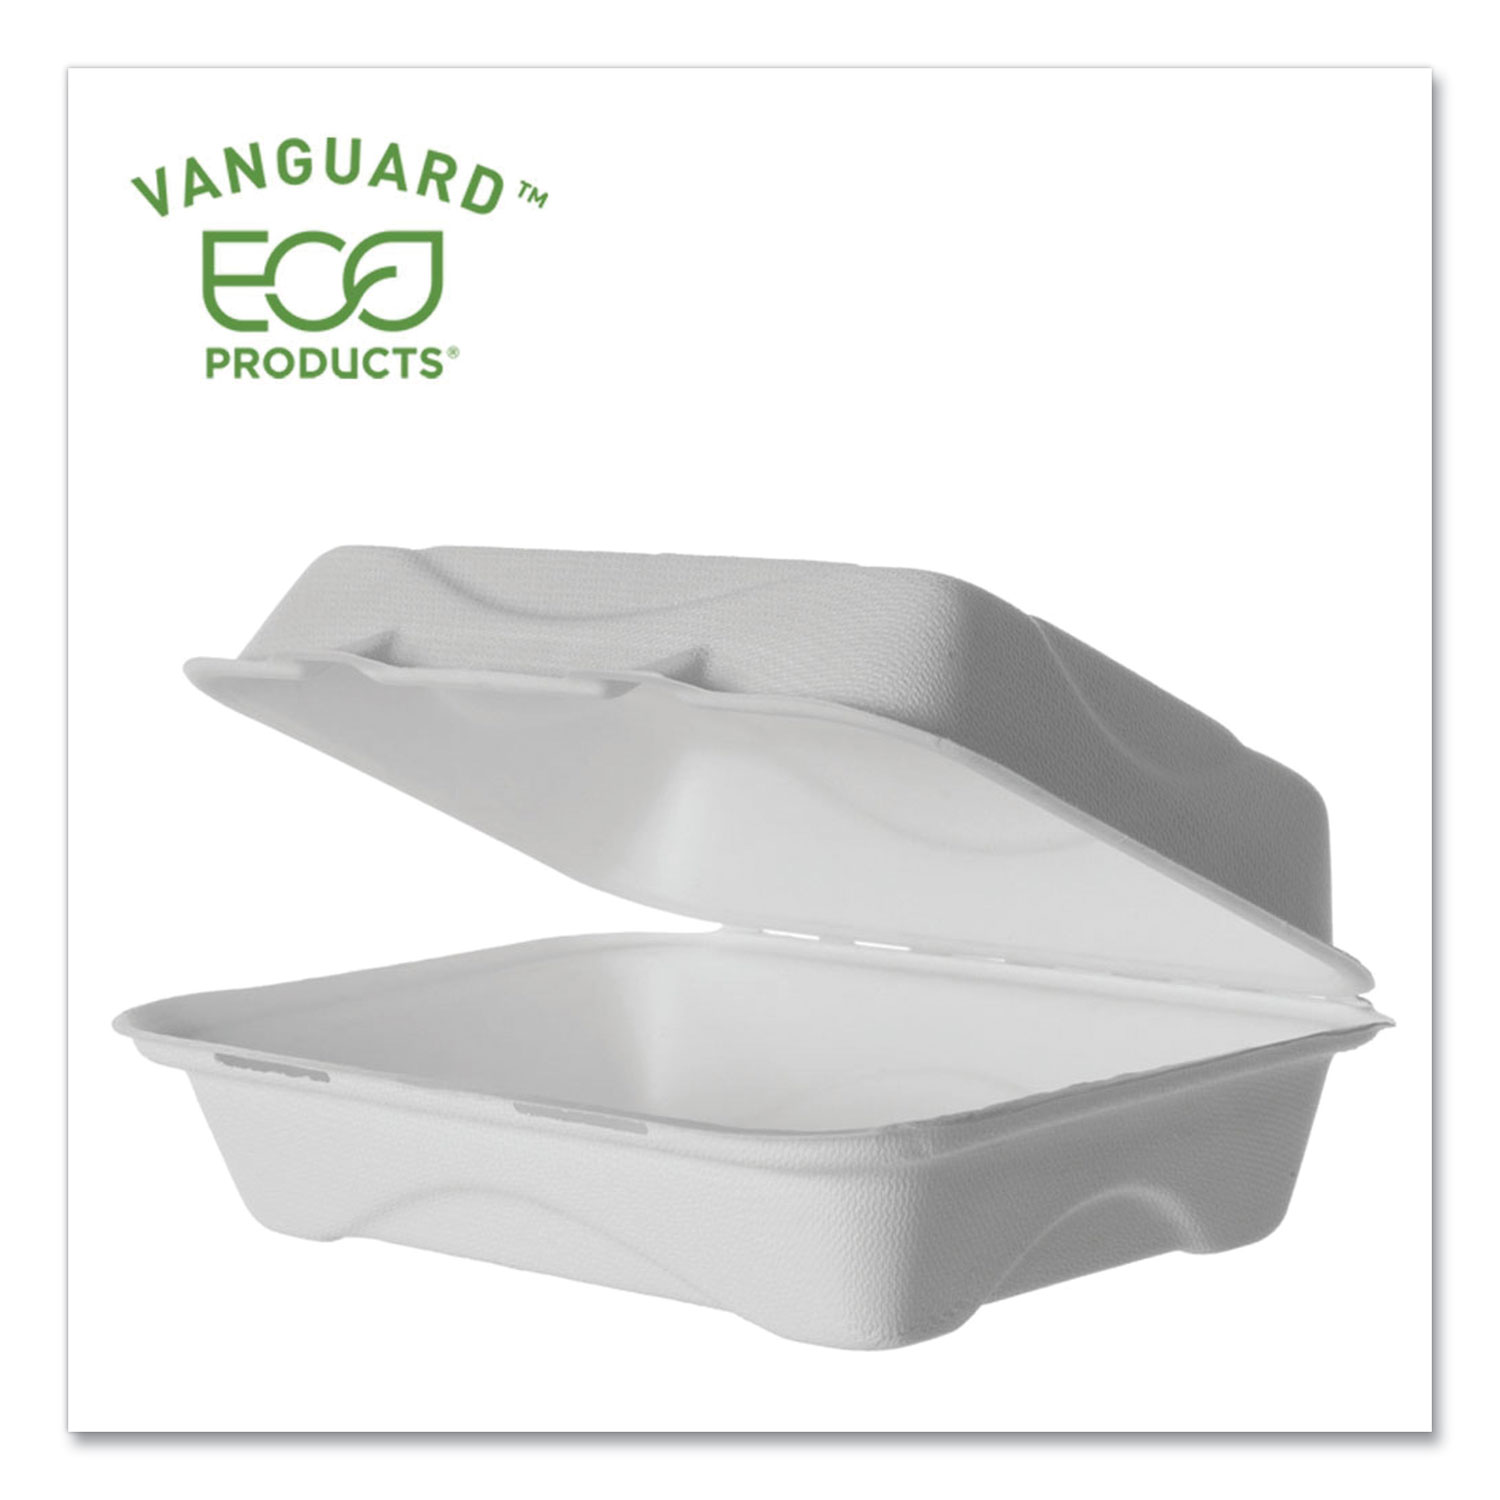  Eco-Products EP-HC96NFA Vanguard Renewable and Compostable Sugarcane Clamshells, 1-Compartment, 9 x 6 x 3, White, 250/Carton (ECOEPHC96NFA) 